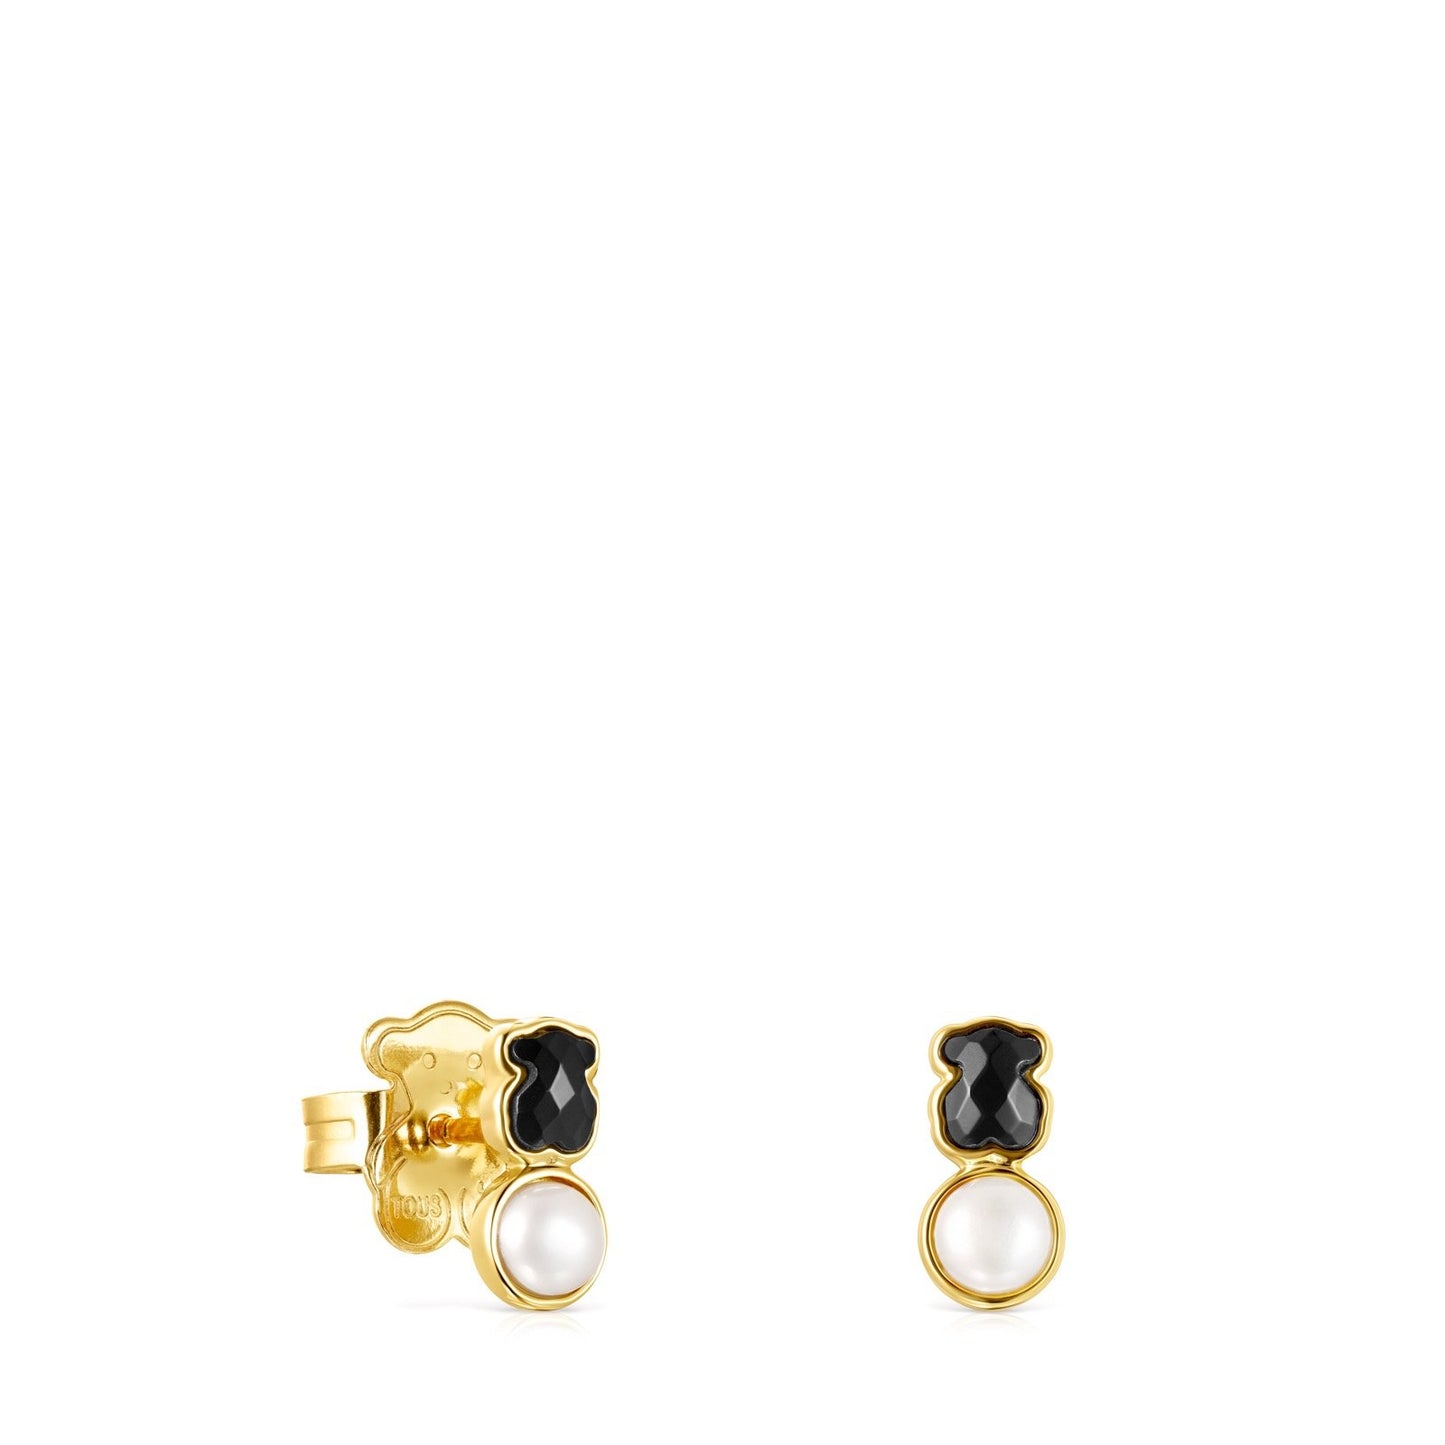 Tous Glory Earrings in Vermeil Silver with Onyx and Pearl 918593600 –